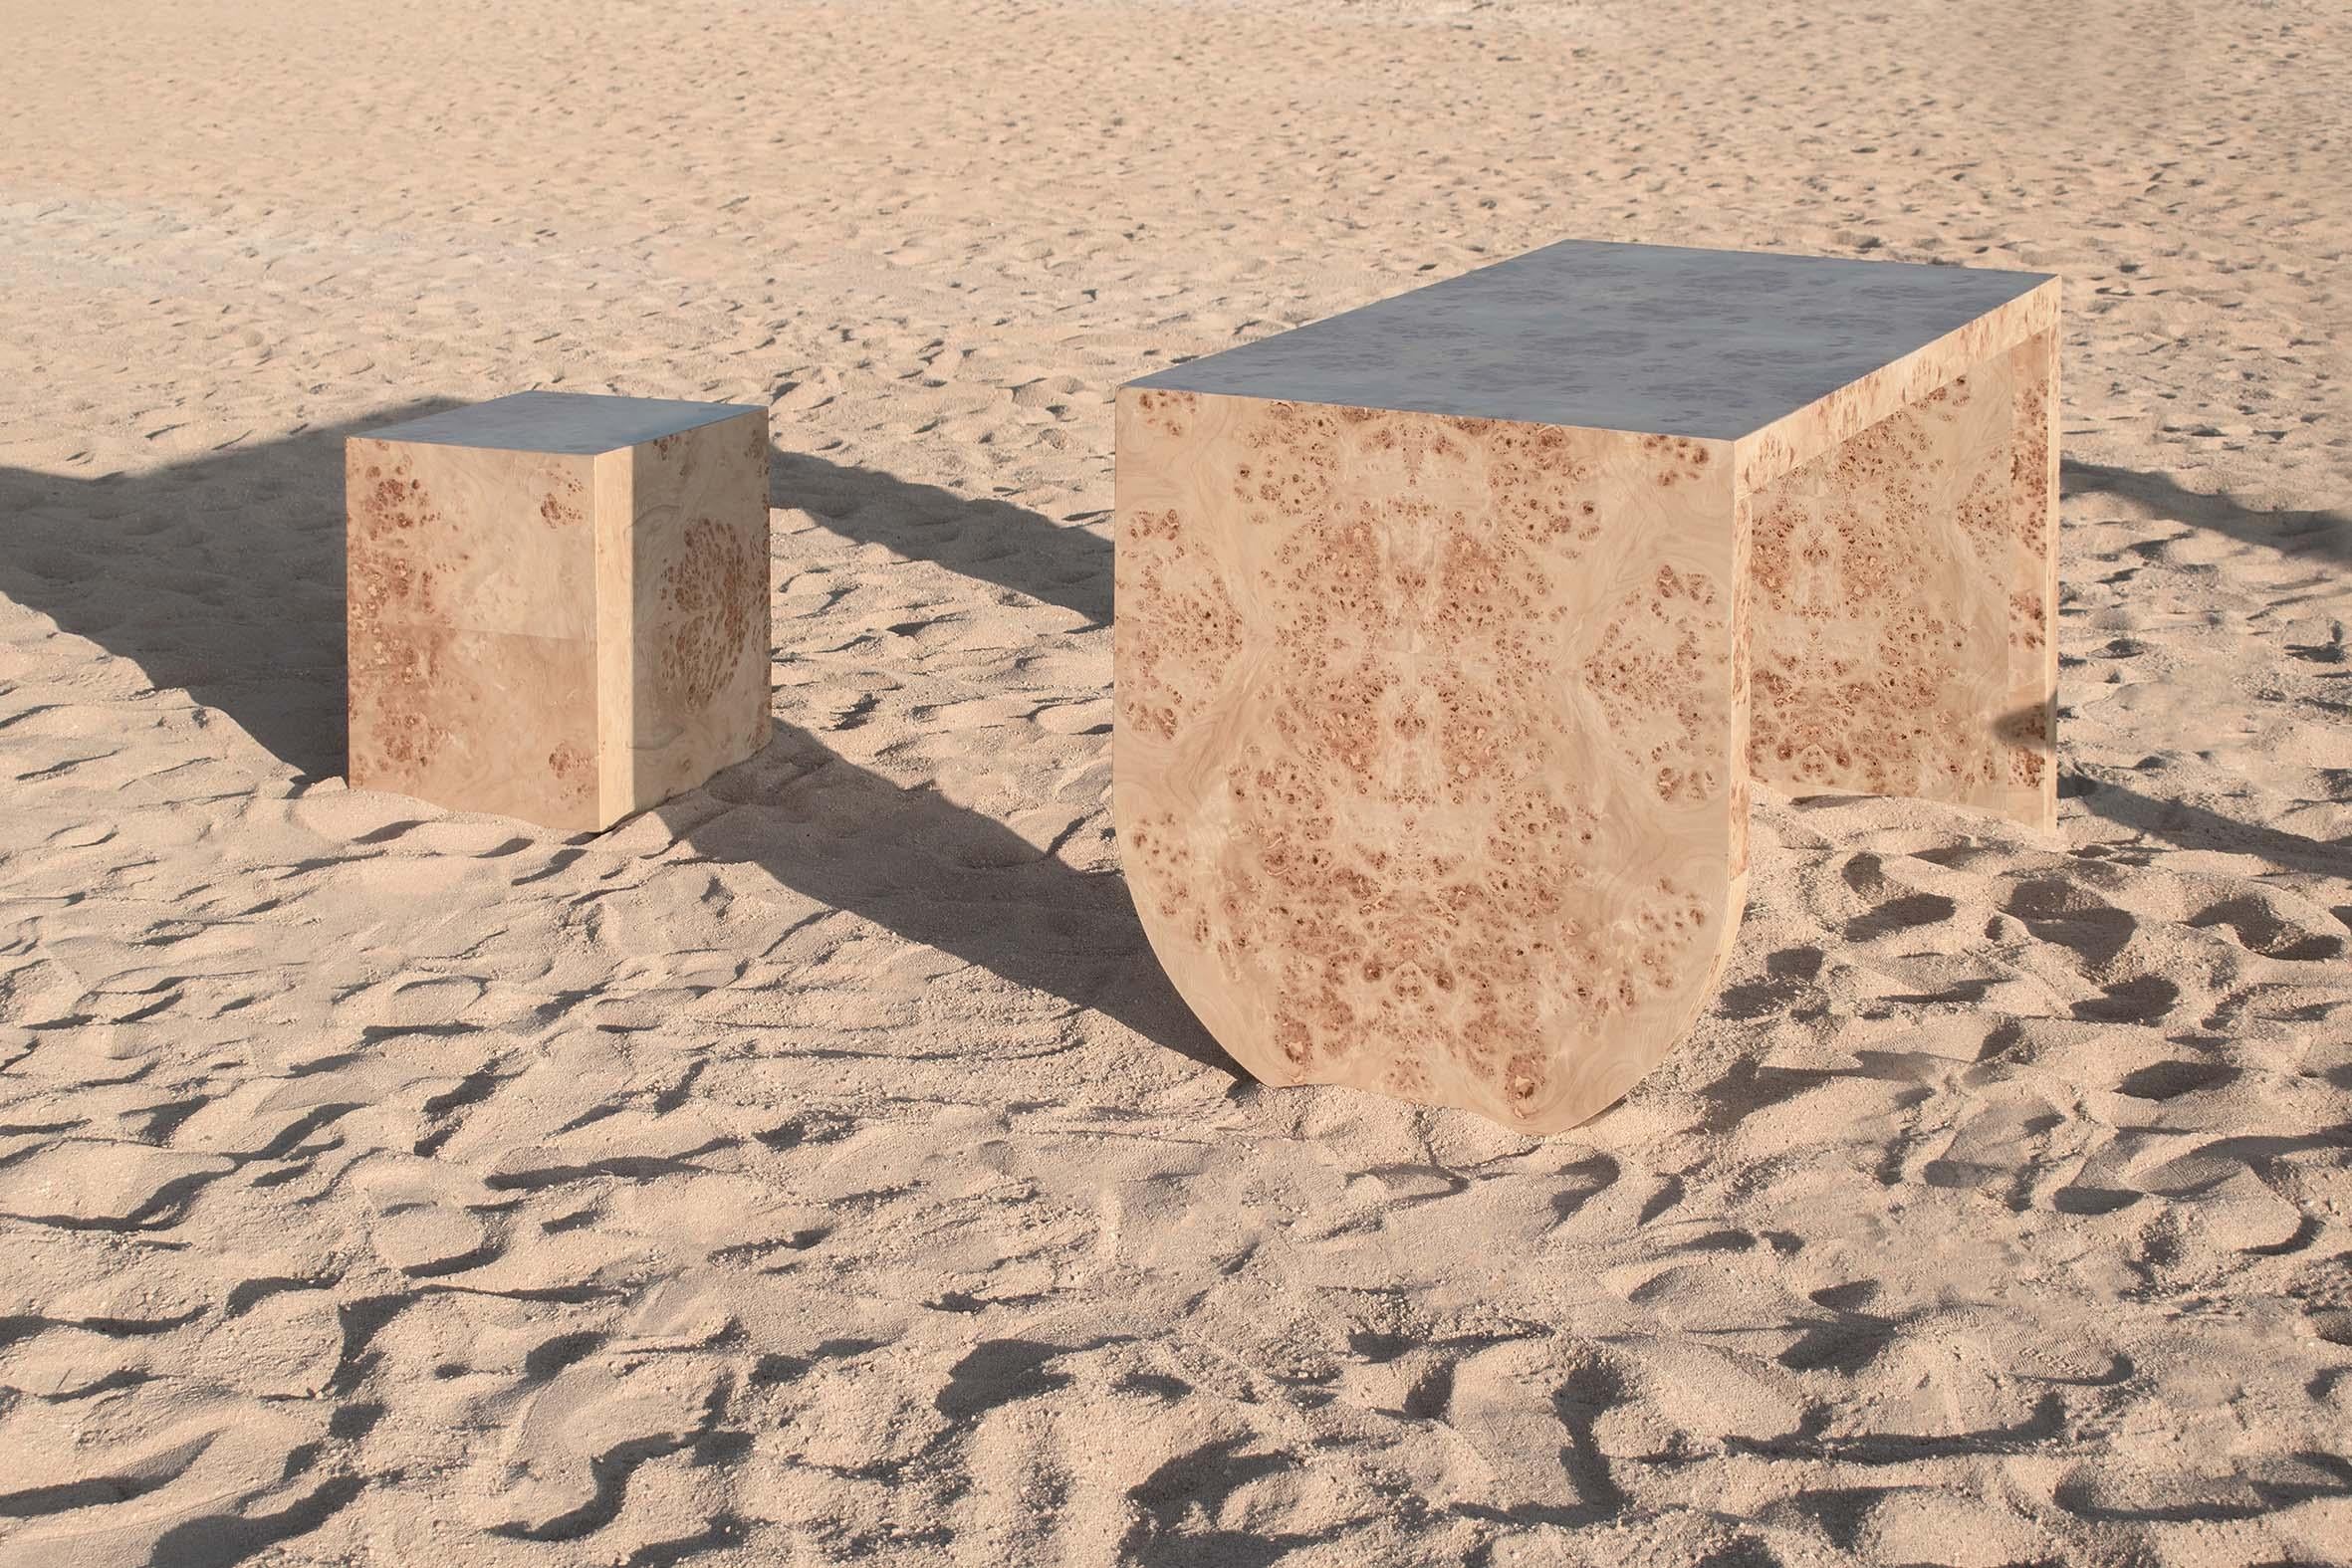 Epifania desk & cube by Studio Christinekalia
Dimensions: Desk: W 70 x D 140 x H 75 cm.
Cube: W 40 x D 40 x H 40 cm.
Materials: Wood, burl venner. 

Christine Kalia is a design studio exploring modes of spatial relations between architectural,